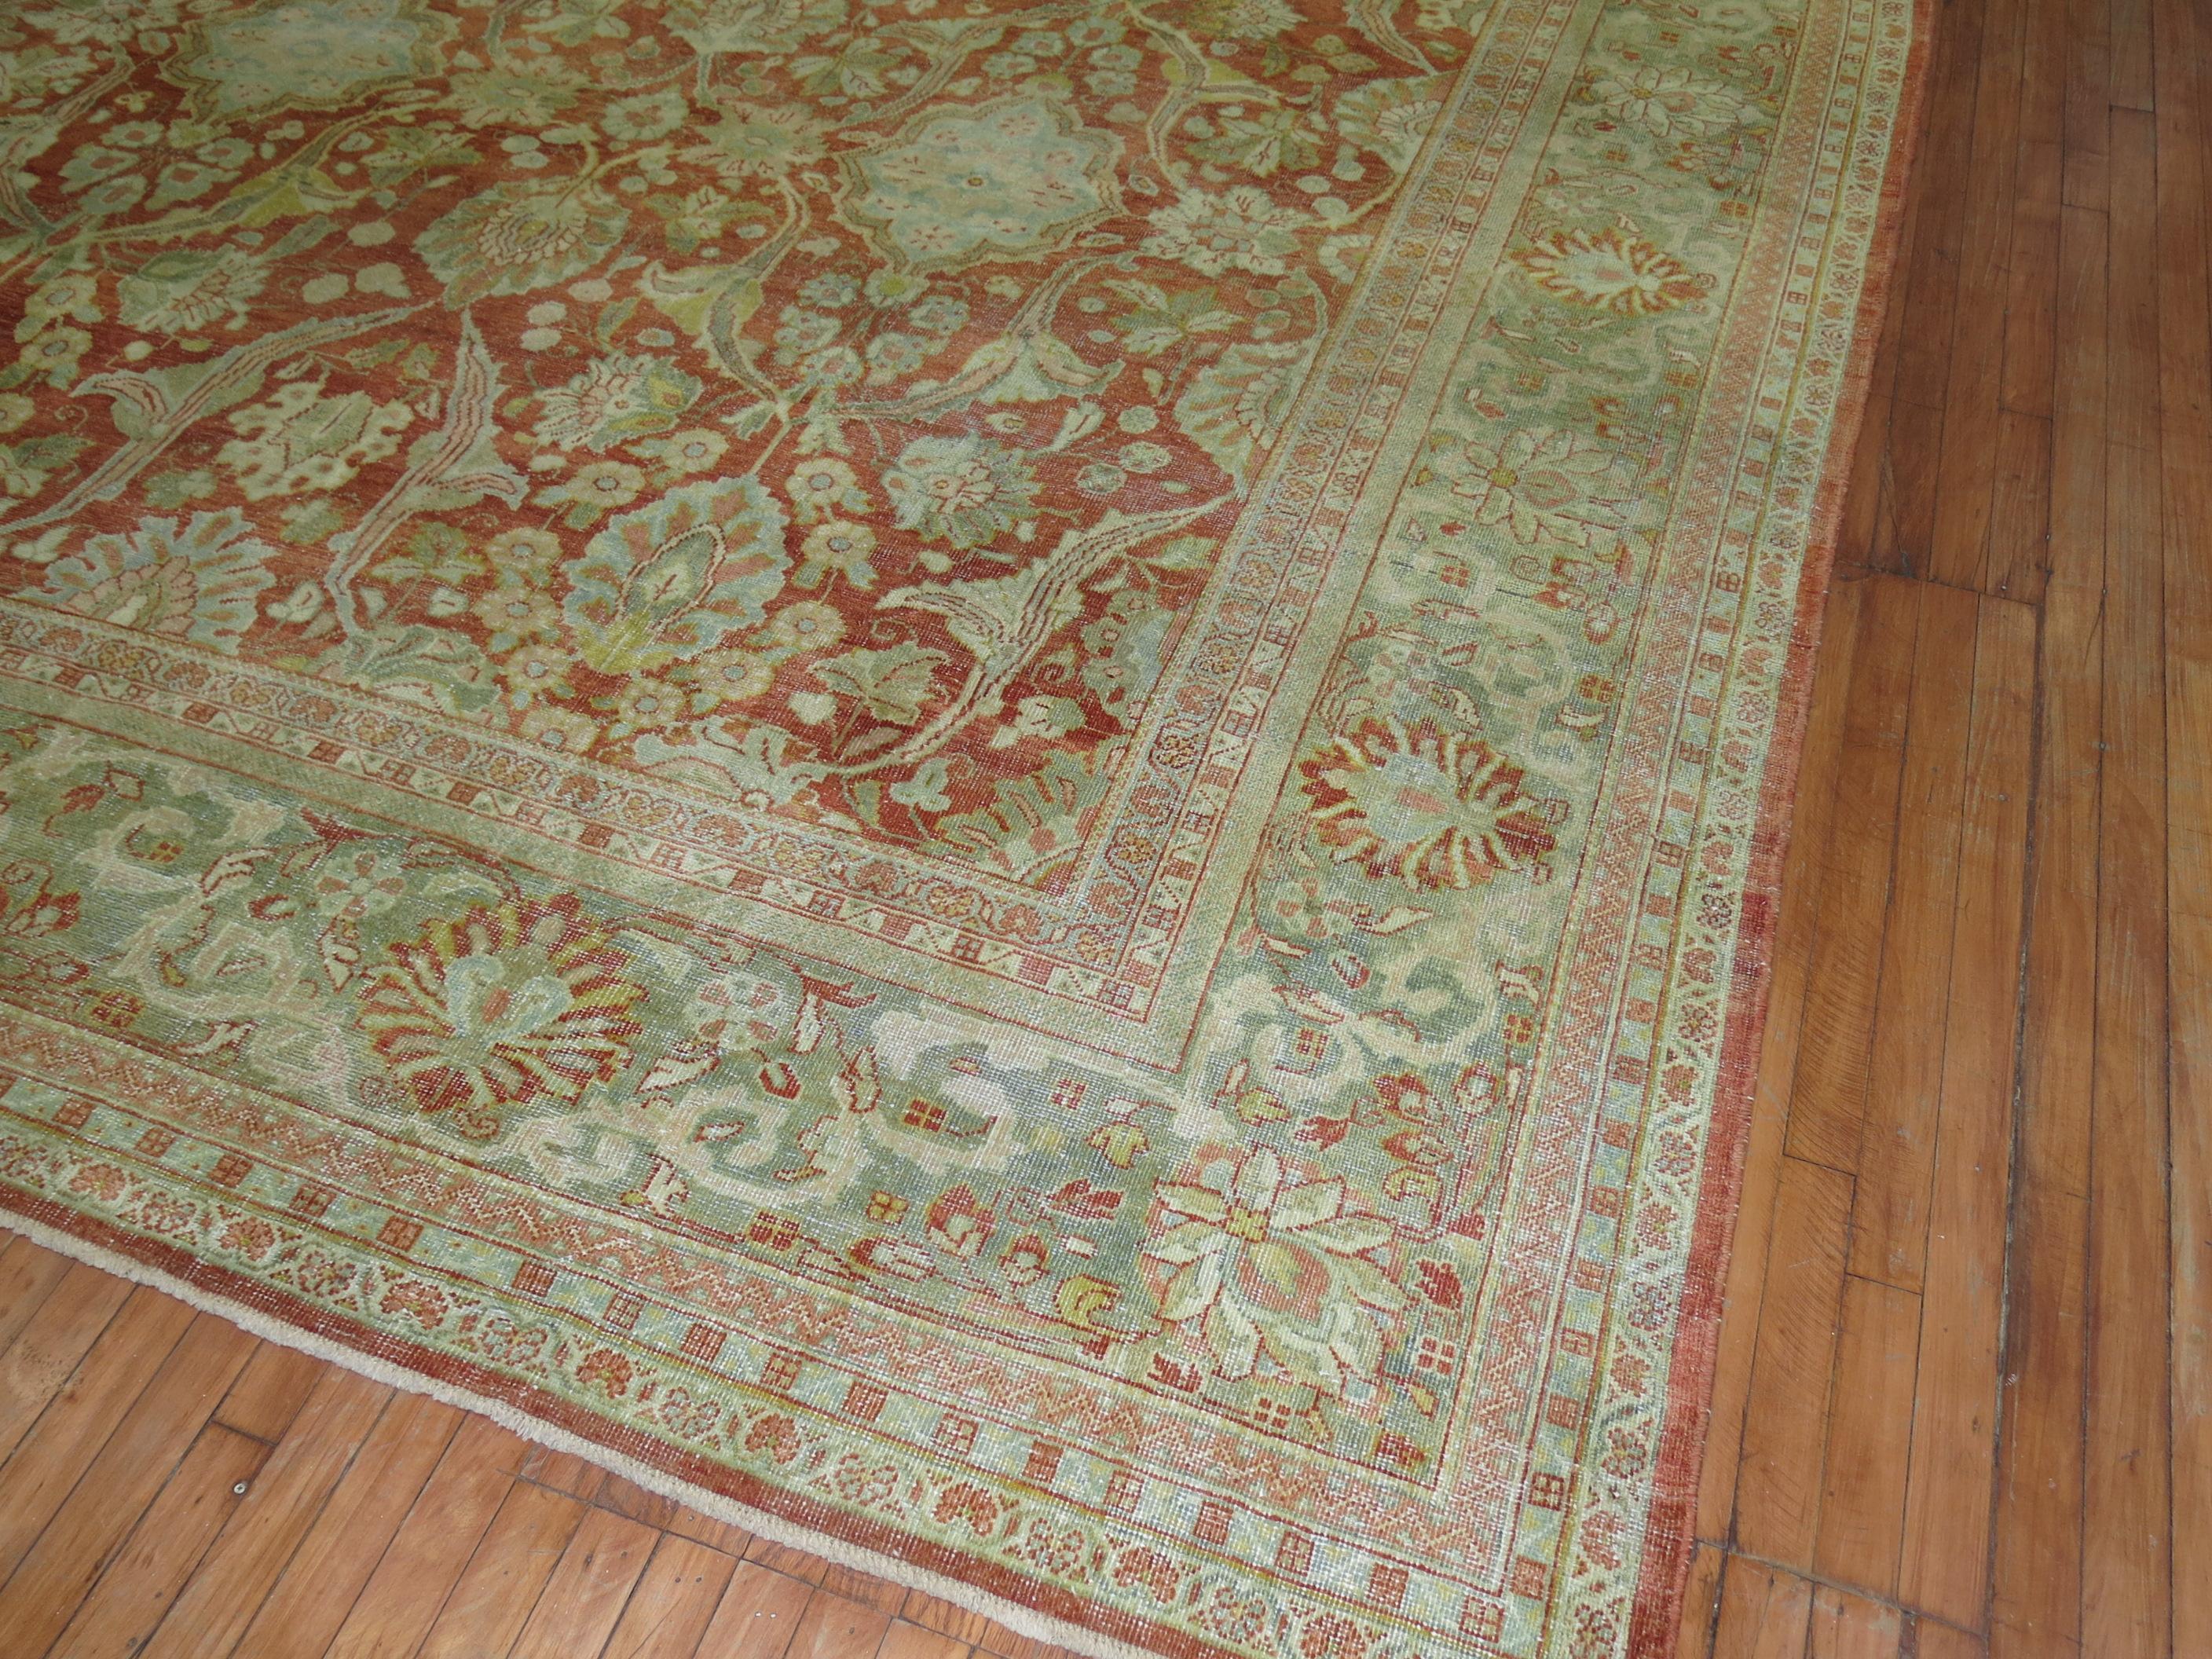 Zabihi Collection Oversize Antique Sultanabad Mahal Persian Carpet In Good Condition For Sale In New York, NY